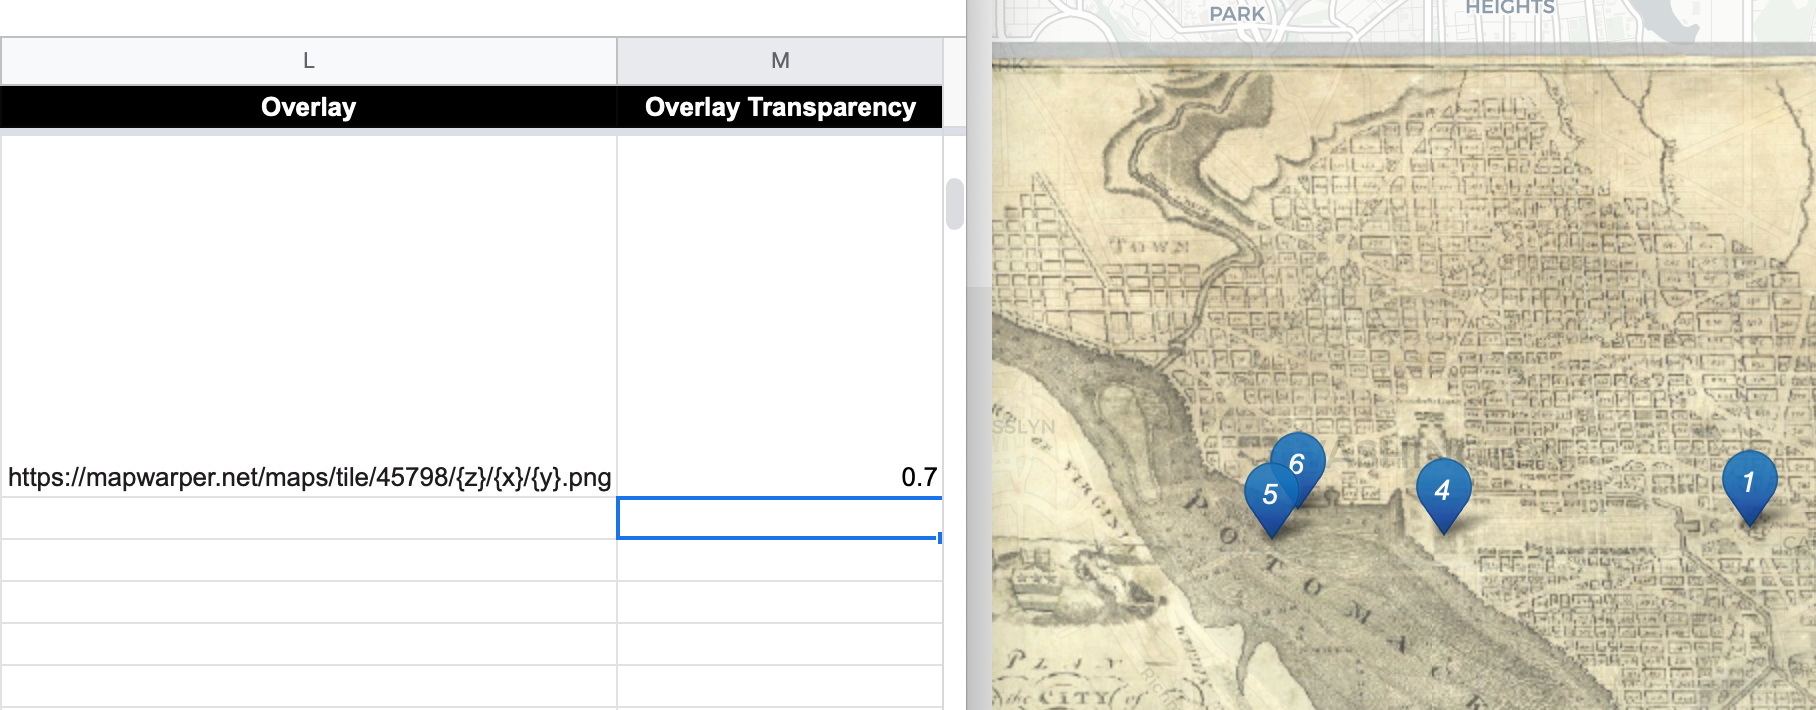 Enter map tile link and transparency level into the Google Sheet template (on left) to display it in one or more storymap chapters (on right).